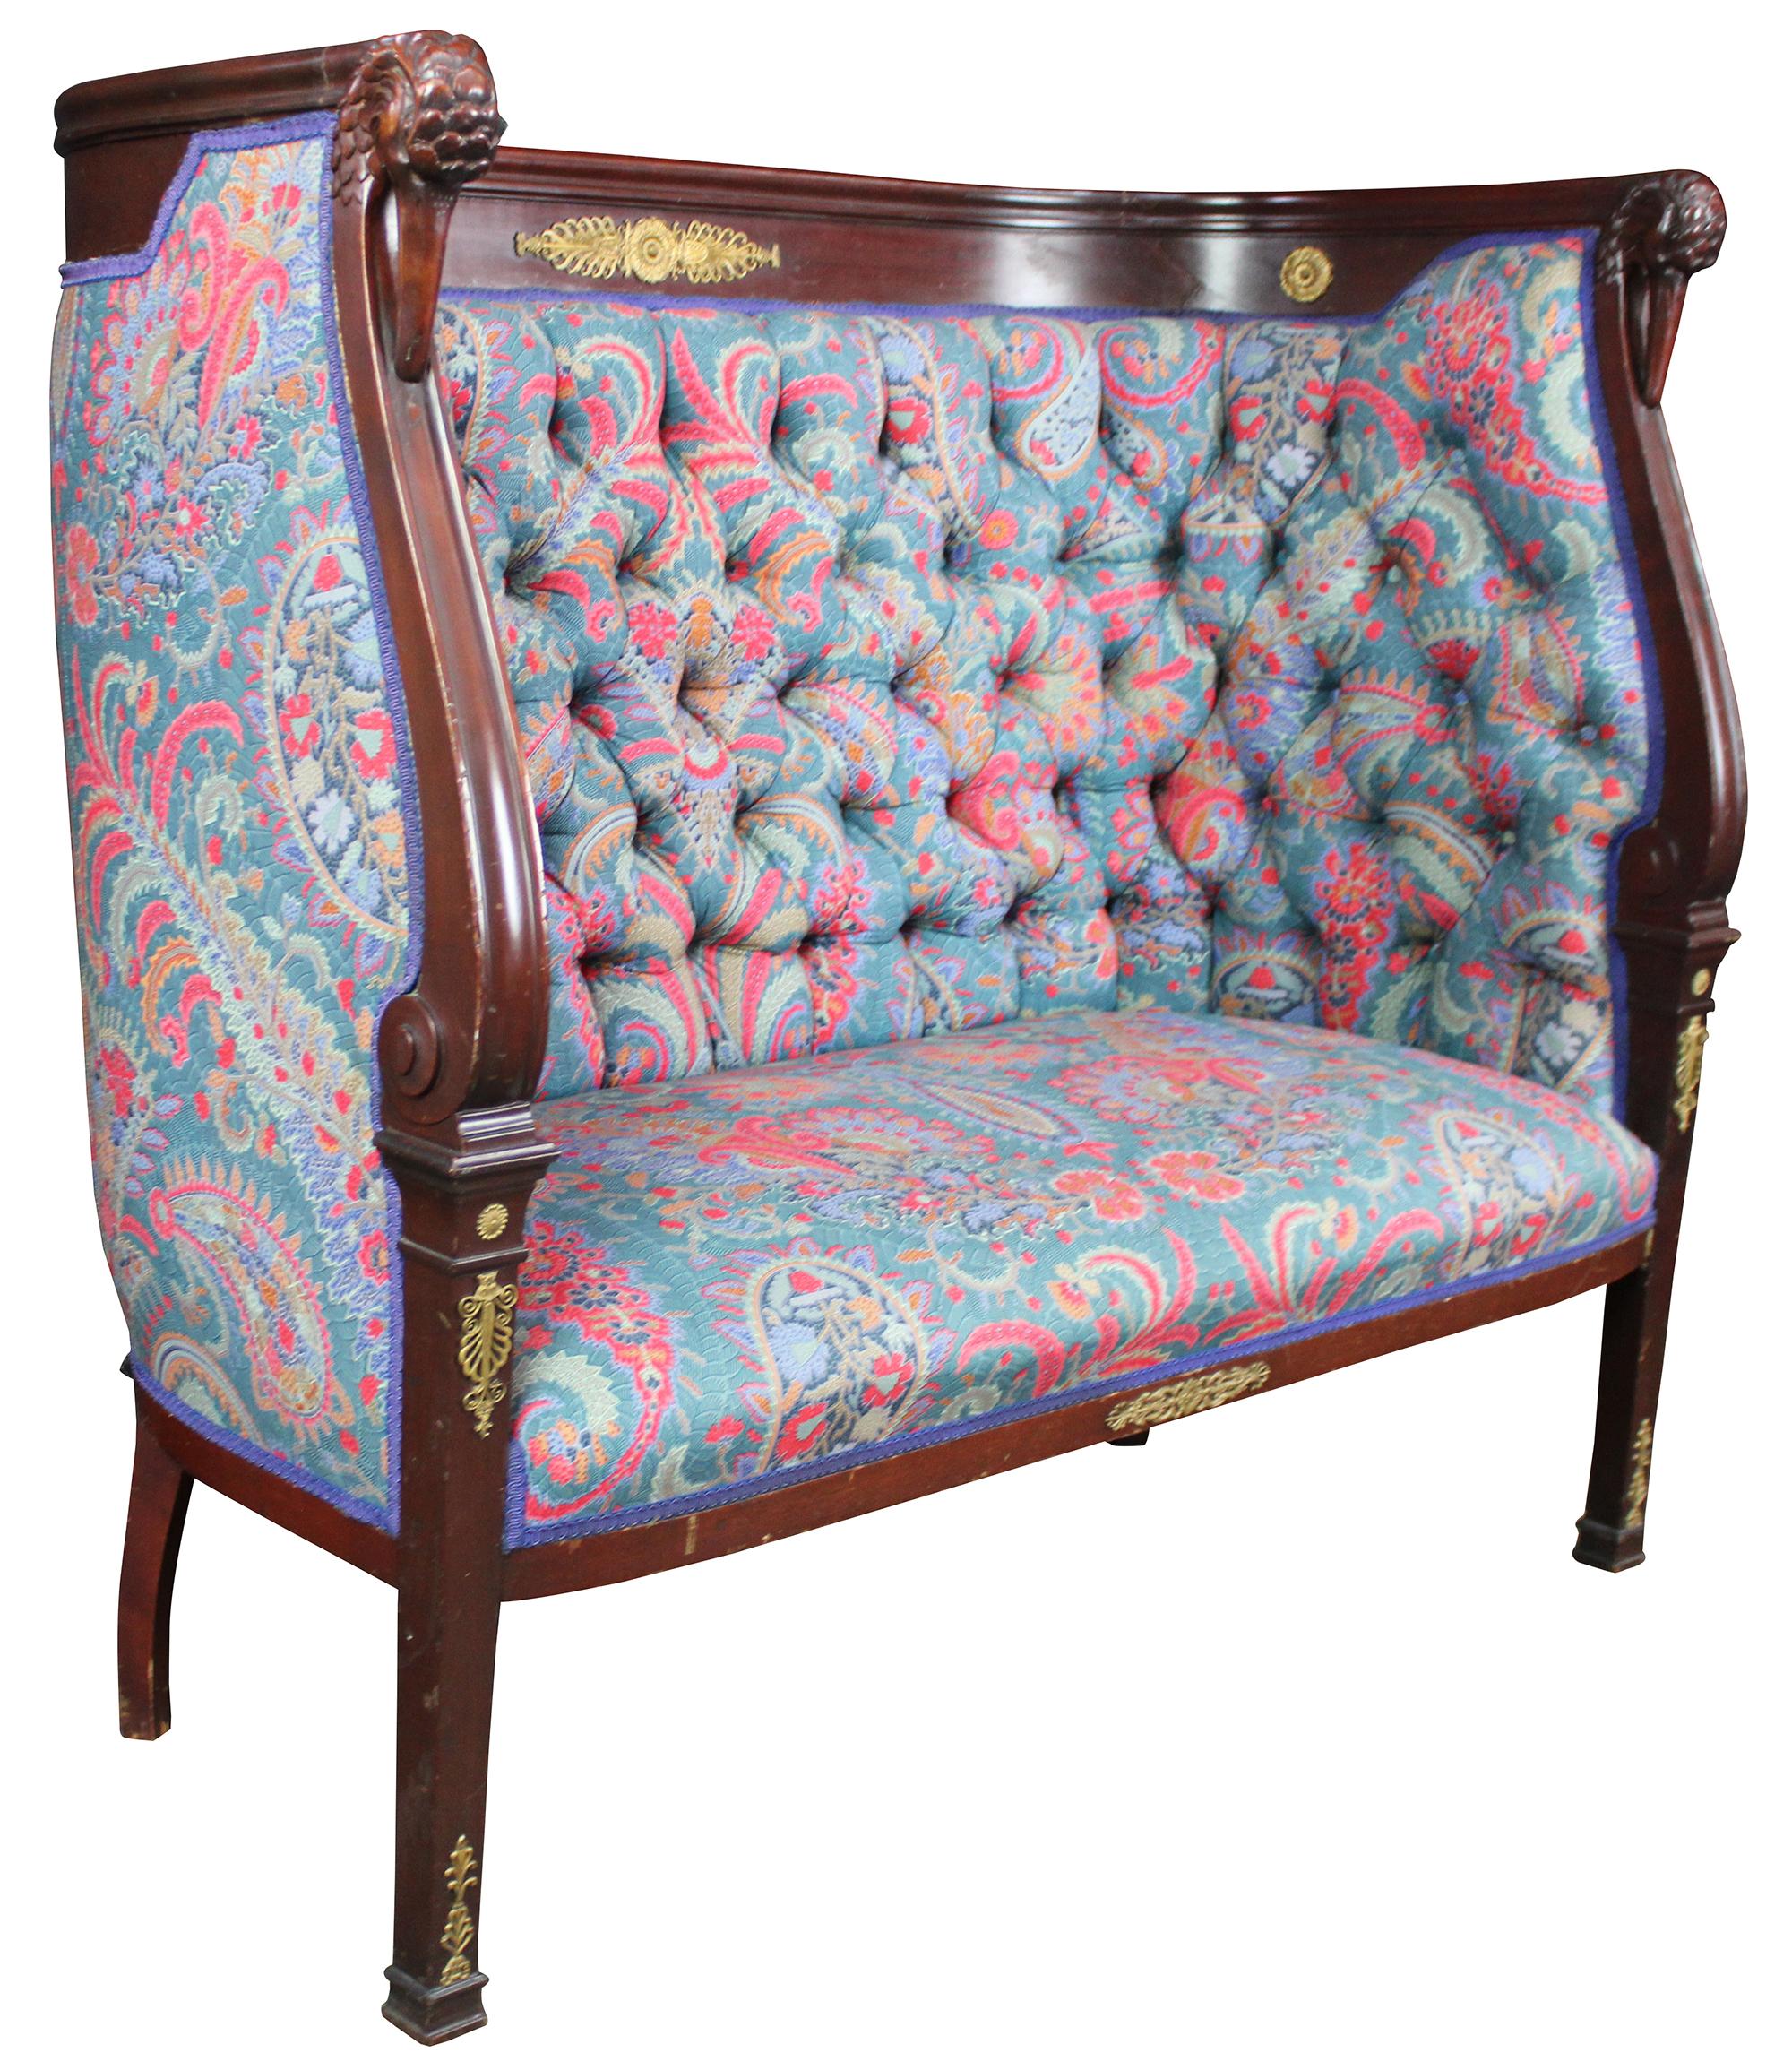 Antique French Empire figural high back settee. Features tufted modern vibrant paisley upholstery with tall rounded back, gilt accents, and carved swan / bird head arms. Measure: 53